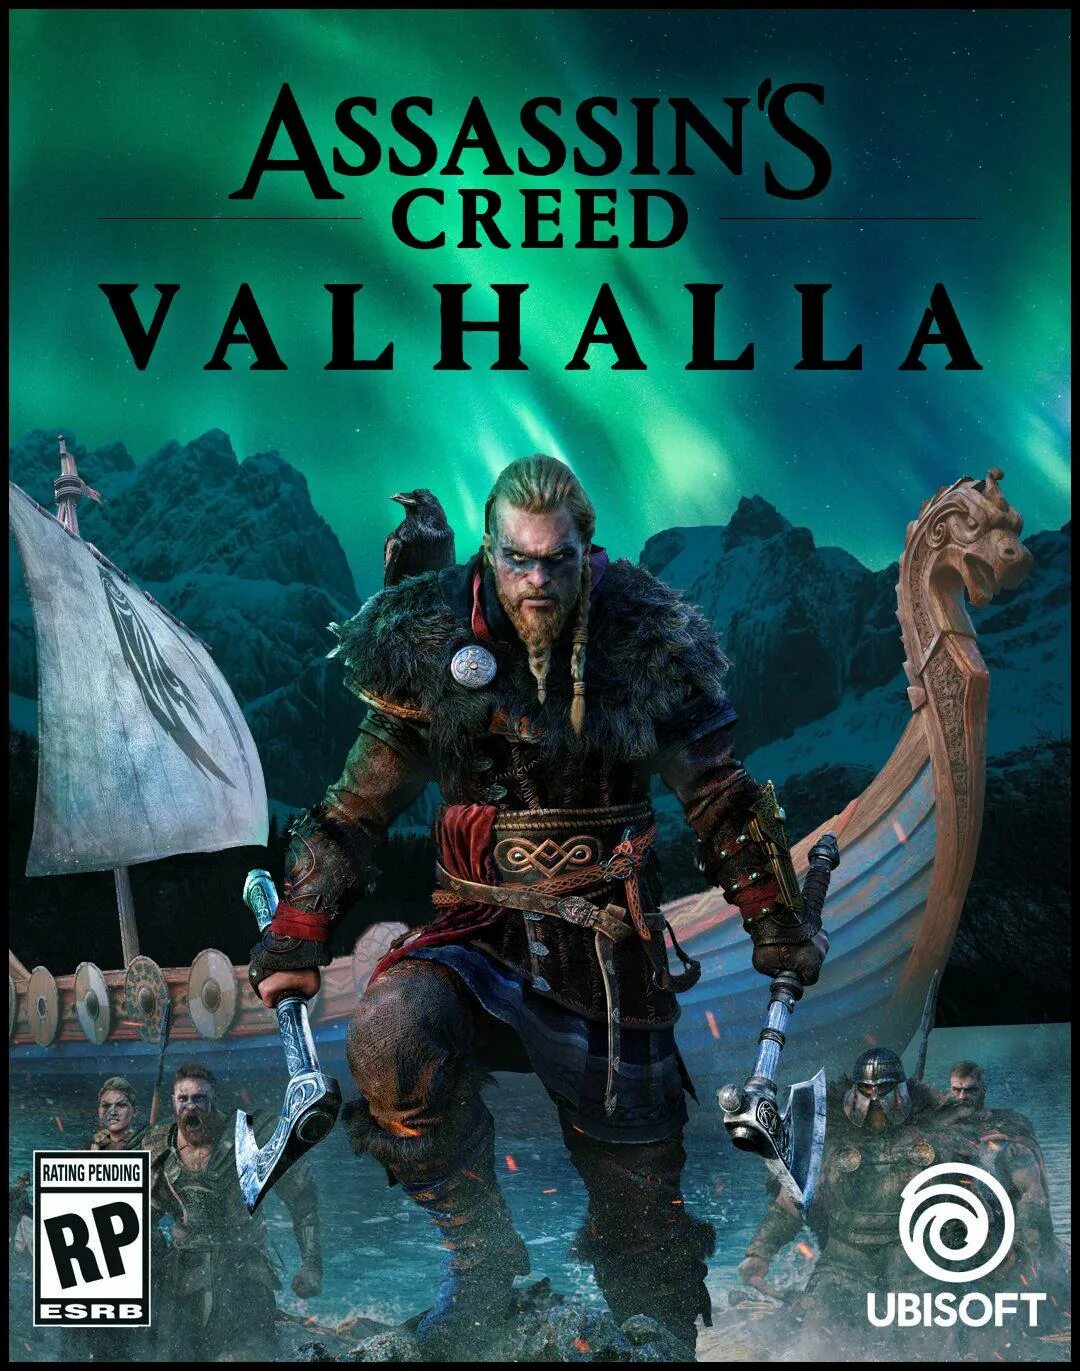 Assassin’s Creed Вальгалла. Assassin's Creed Valhalla ps4 & ps5. Ассасин Крид Вальхалла пс4. Assassin's Creed Valhalla ps4 обложка.